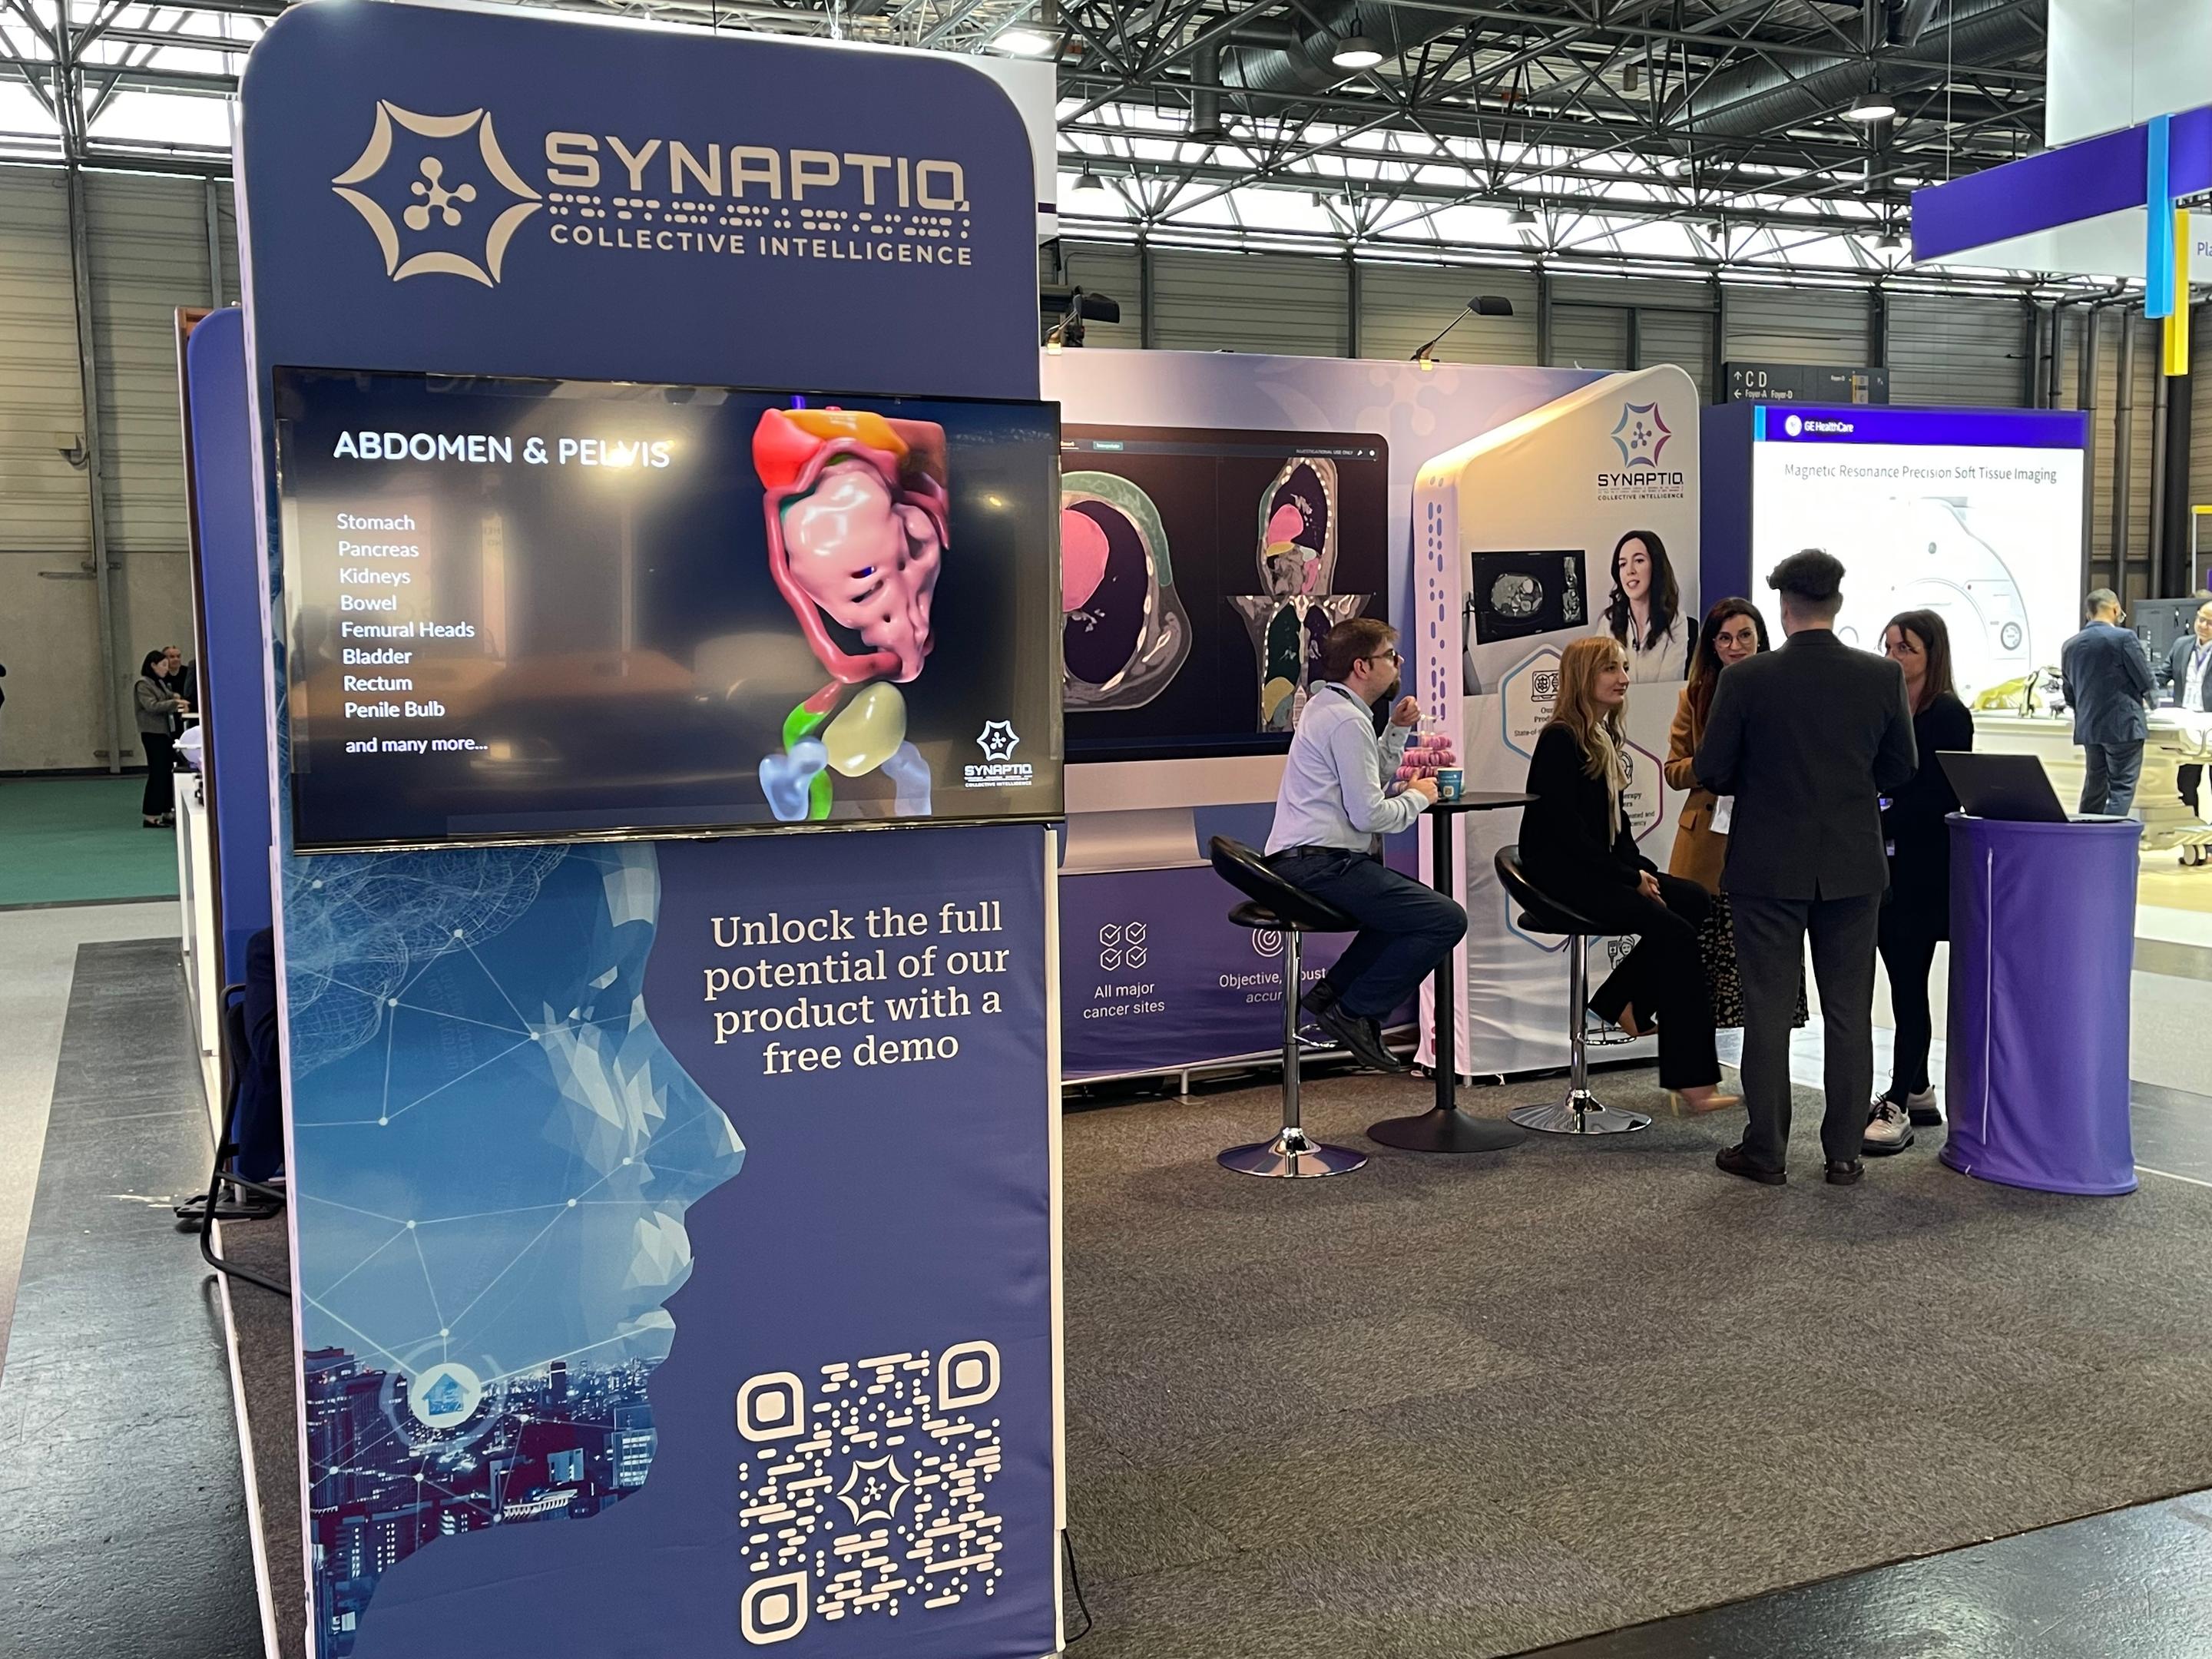 Synaptiq's stand. A stand with medical information and people standing at the stand